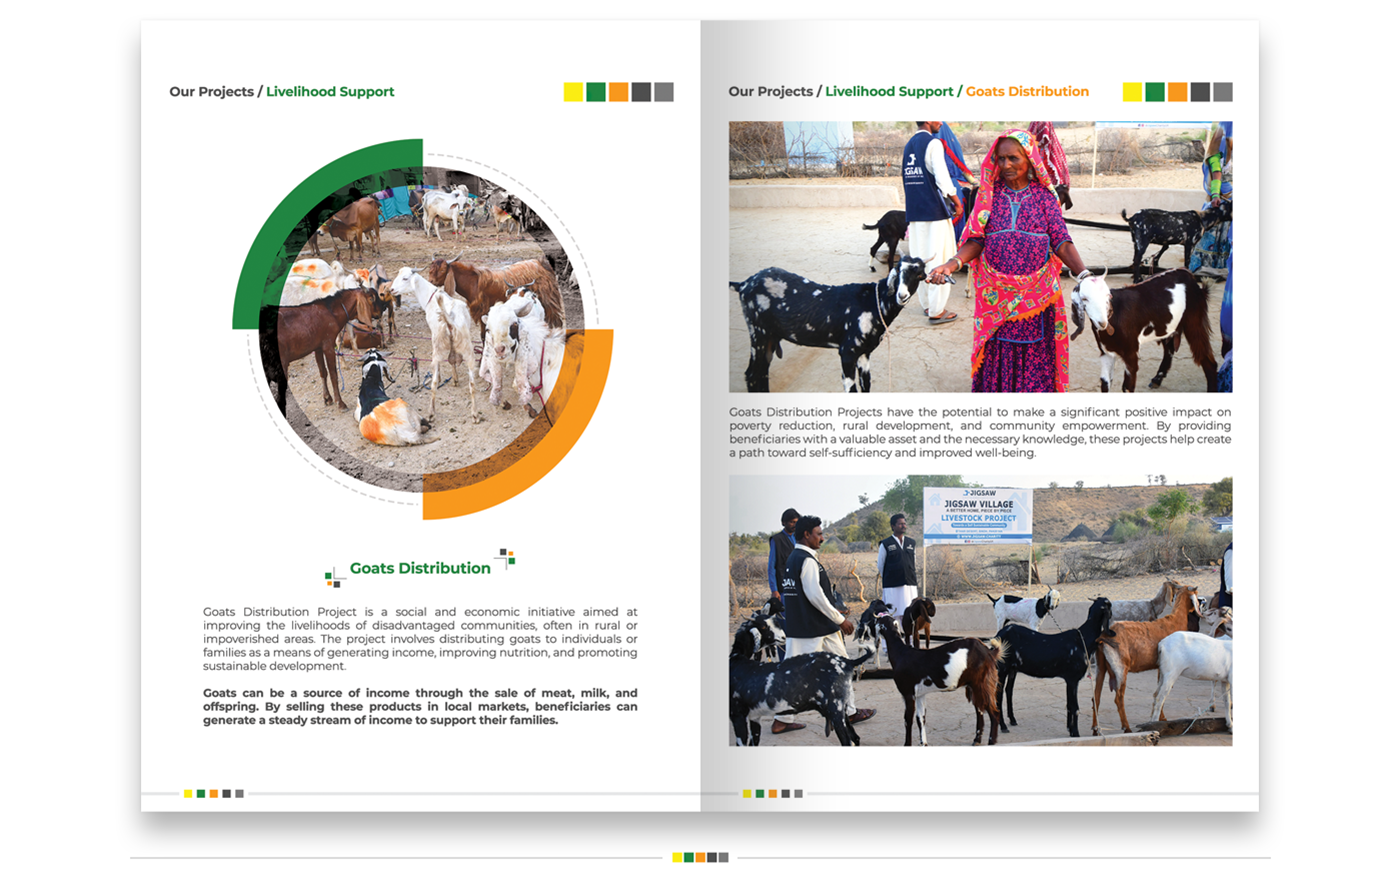 NGO sindh skills water Food  shelter magzine assistance Delelopment sdo